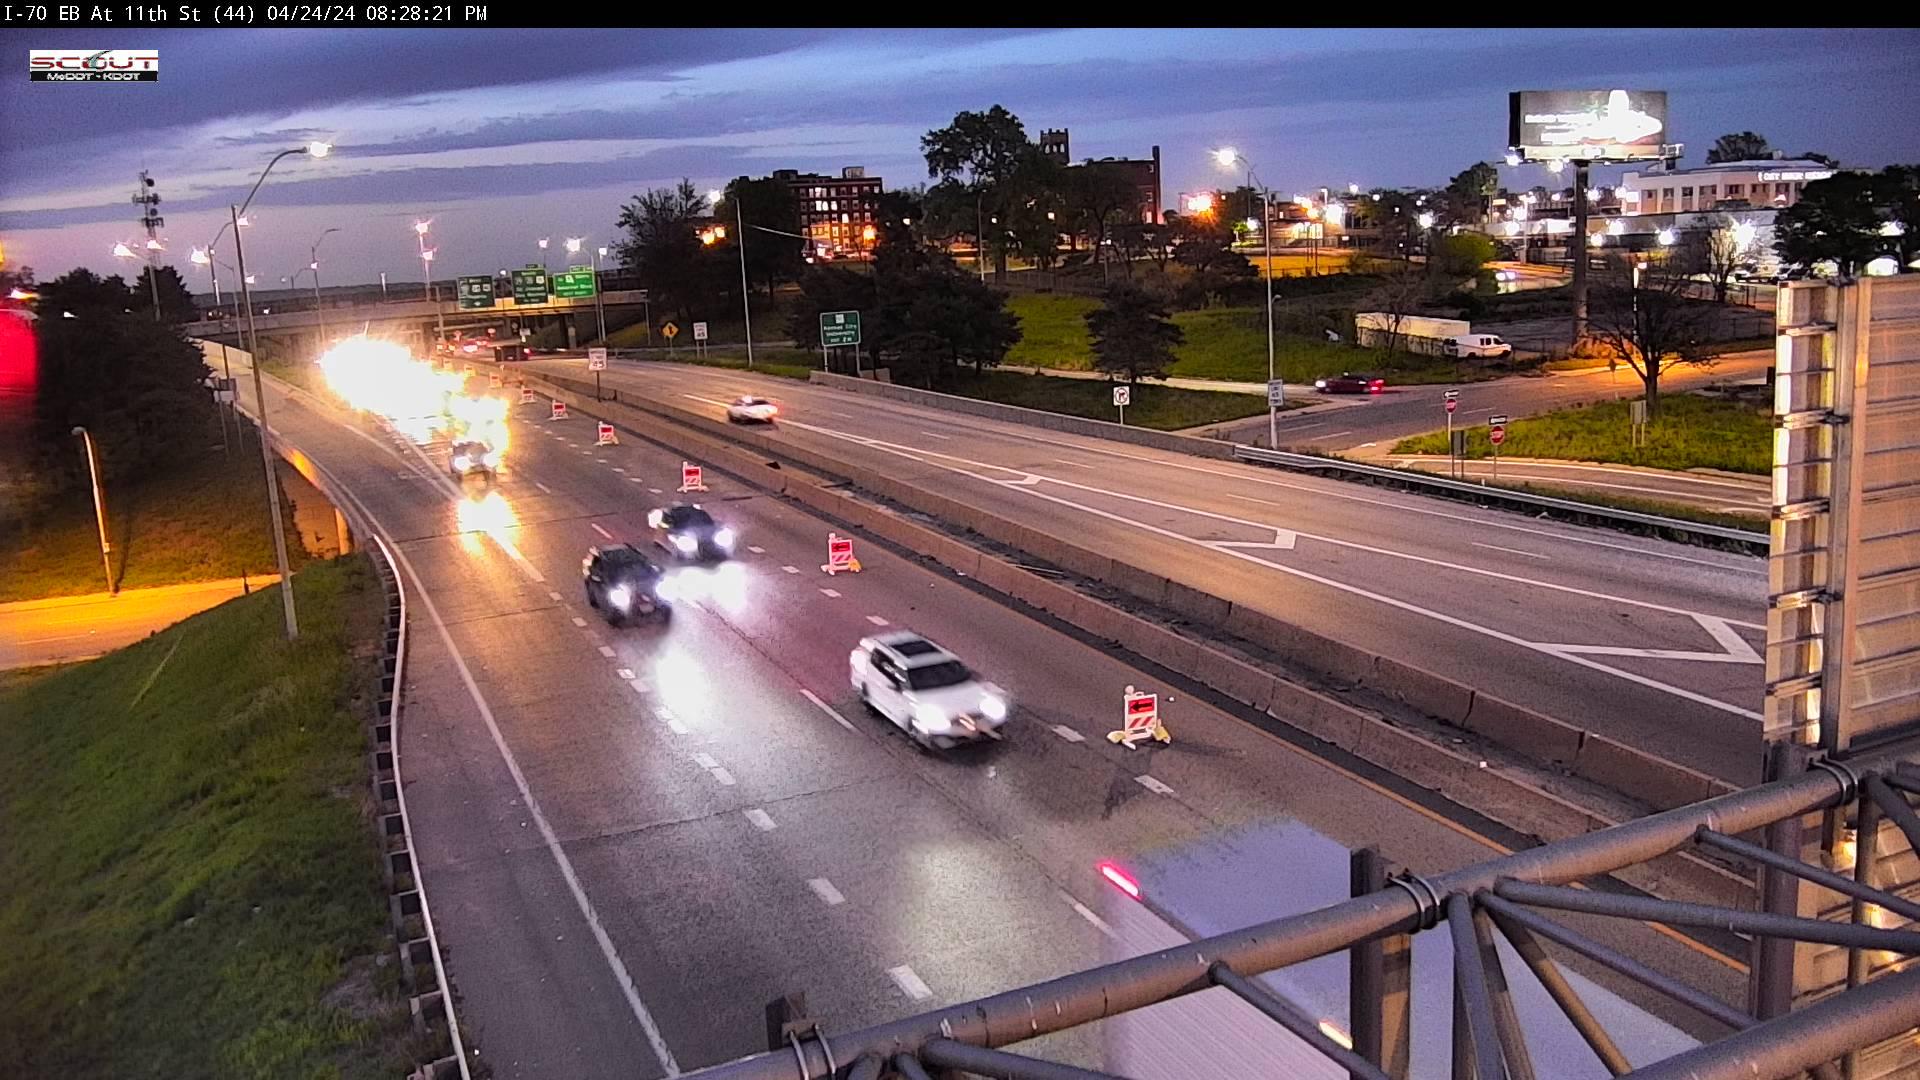 Central Business District KC: I- E @ TH ST Traffic Camera